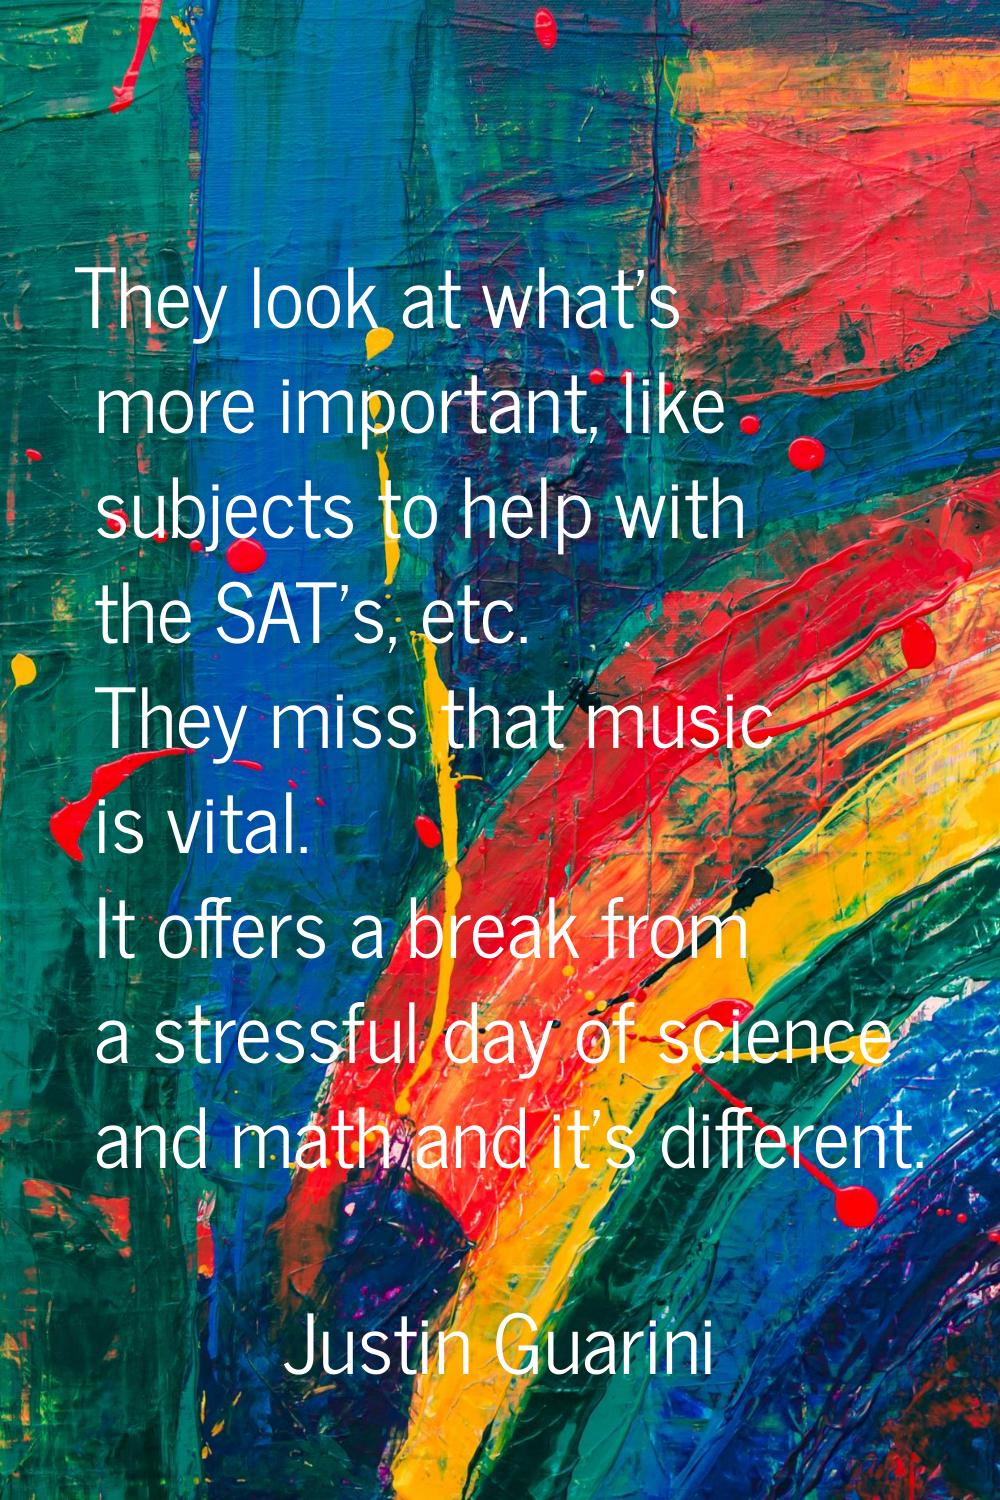 They look at what's more important, like subjects to help with the SAT's, etc. They miss that music